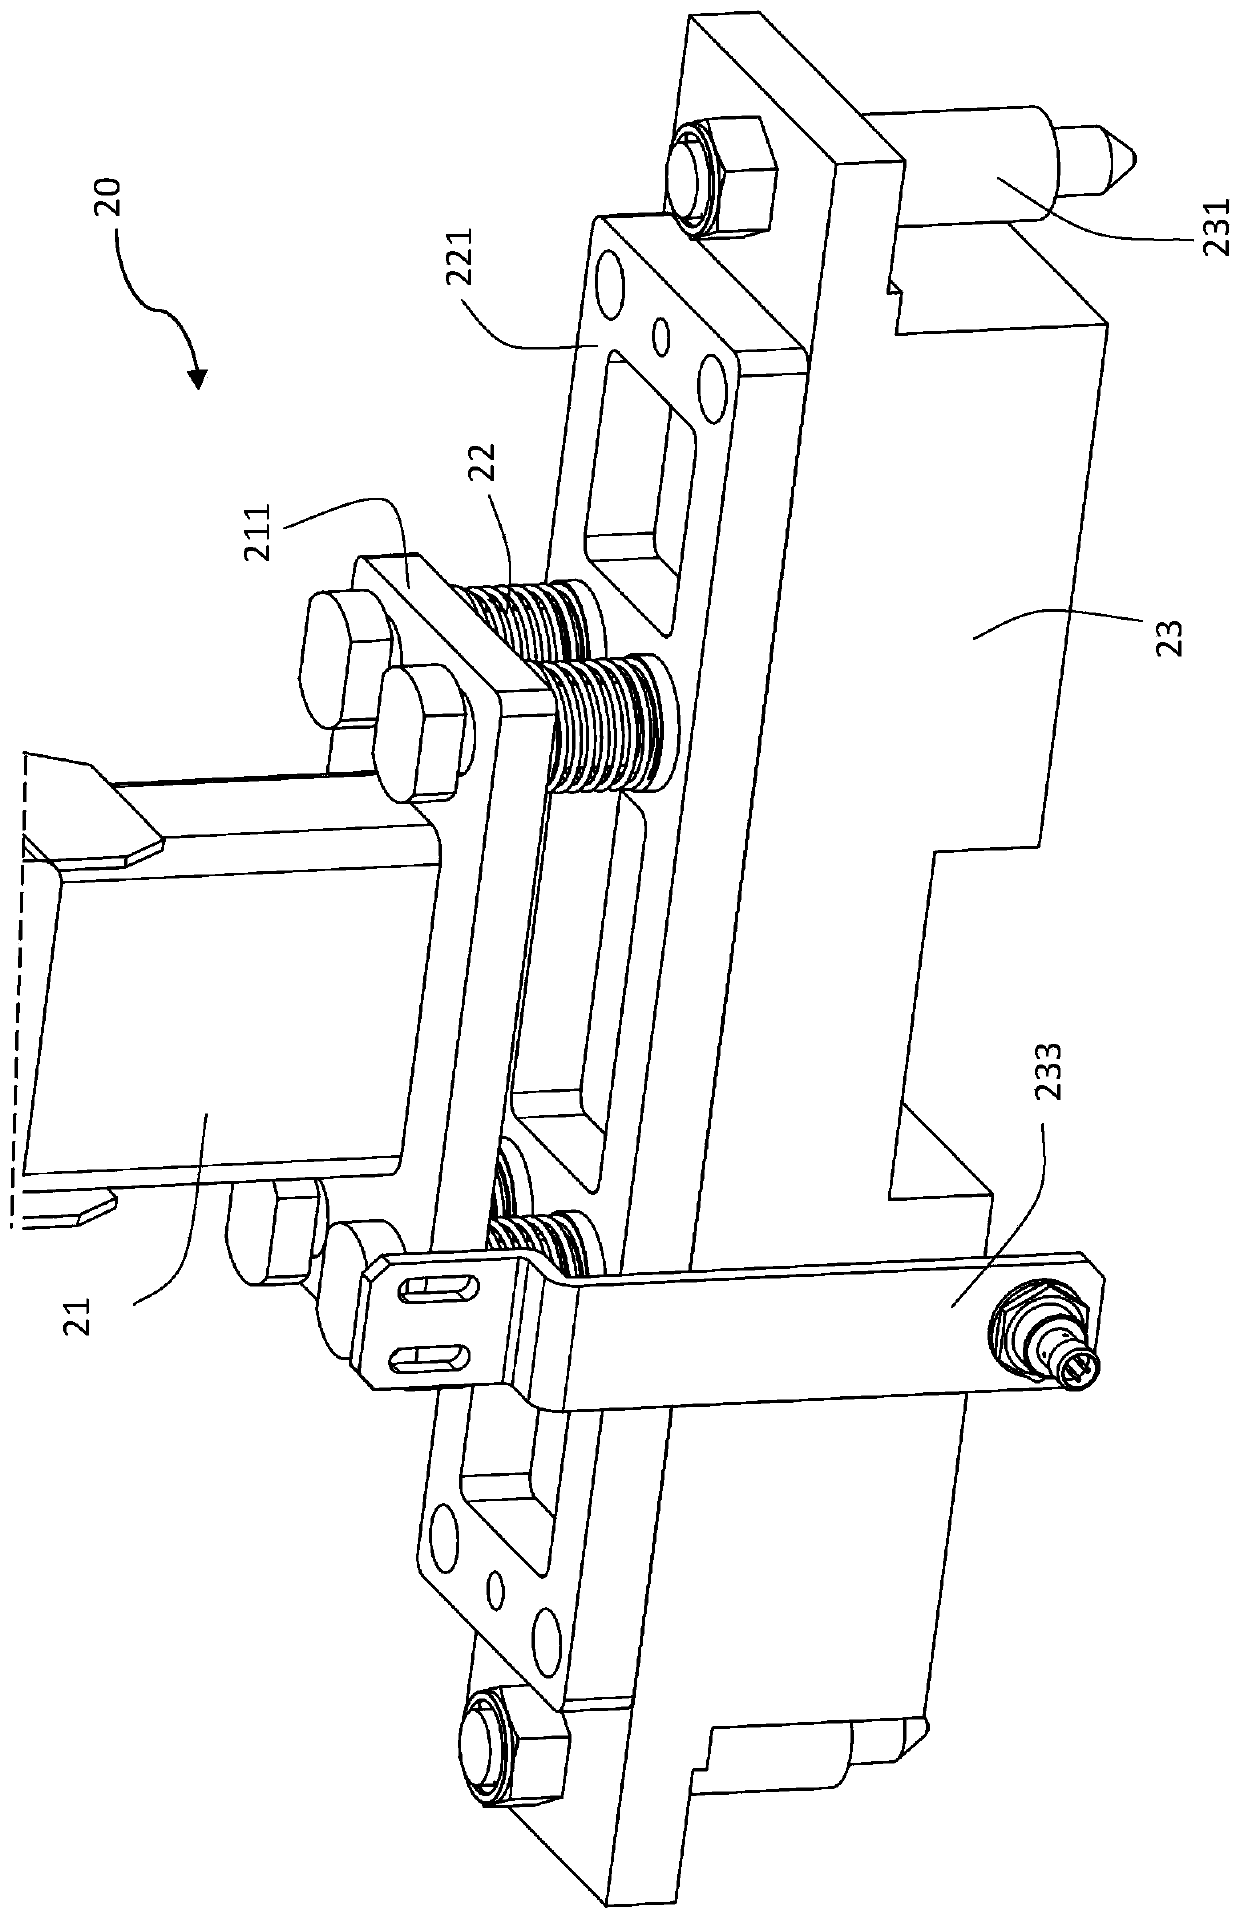 Clamping jaw mechanism